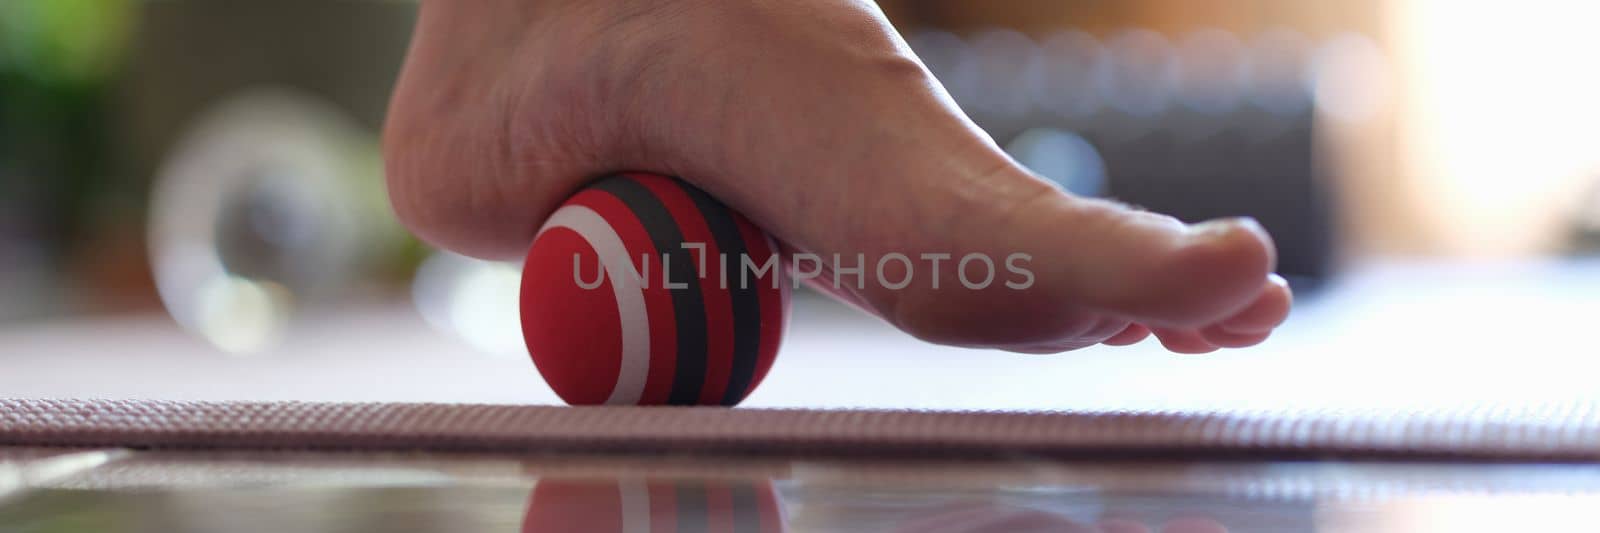 Massage ball applies pressure to painful area on foot. Self-massage and exercises with massage ball for legs concept